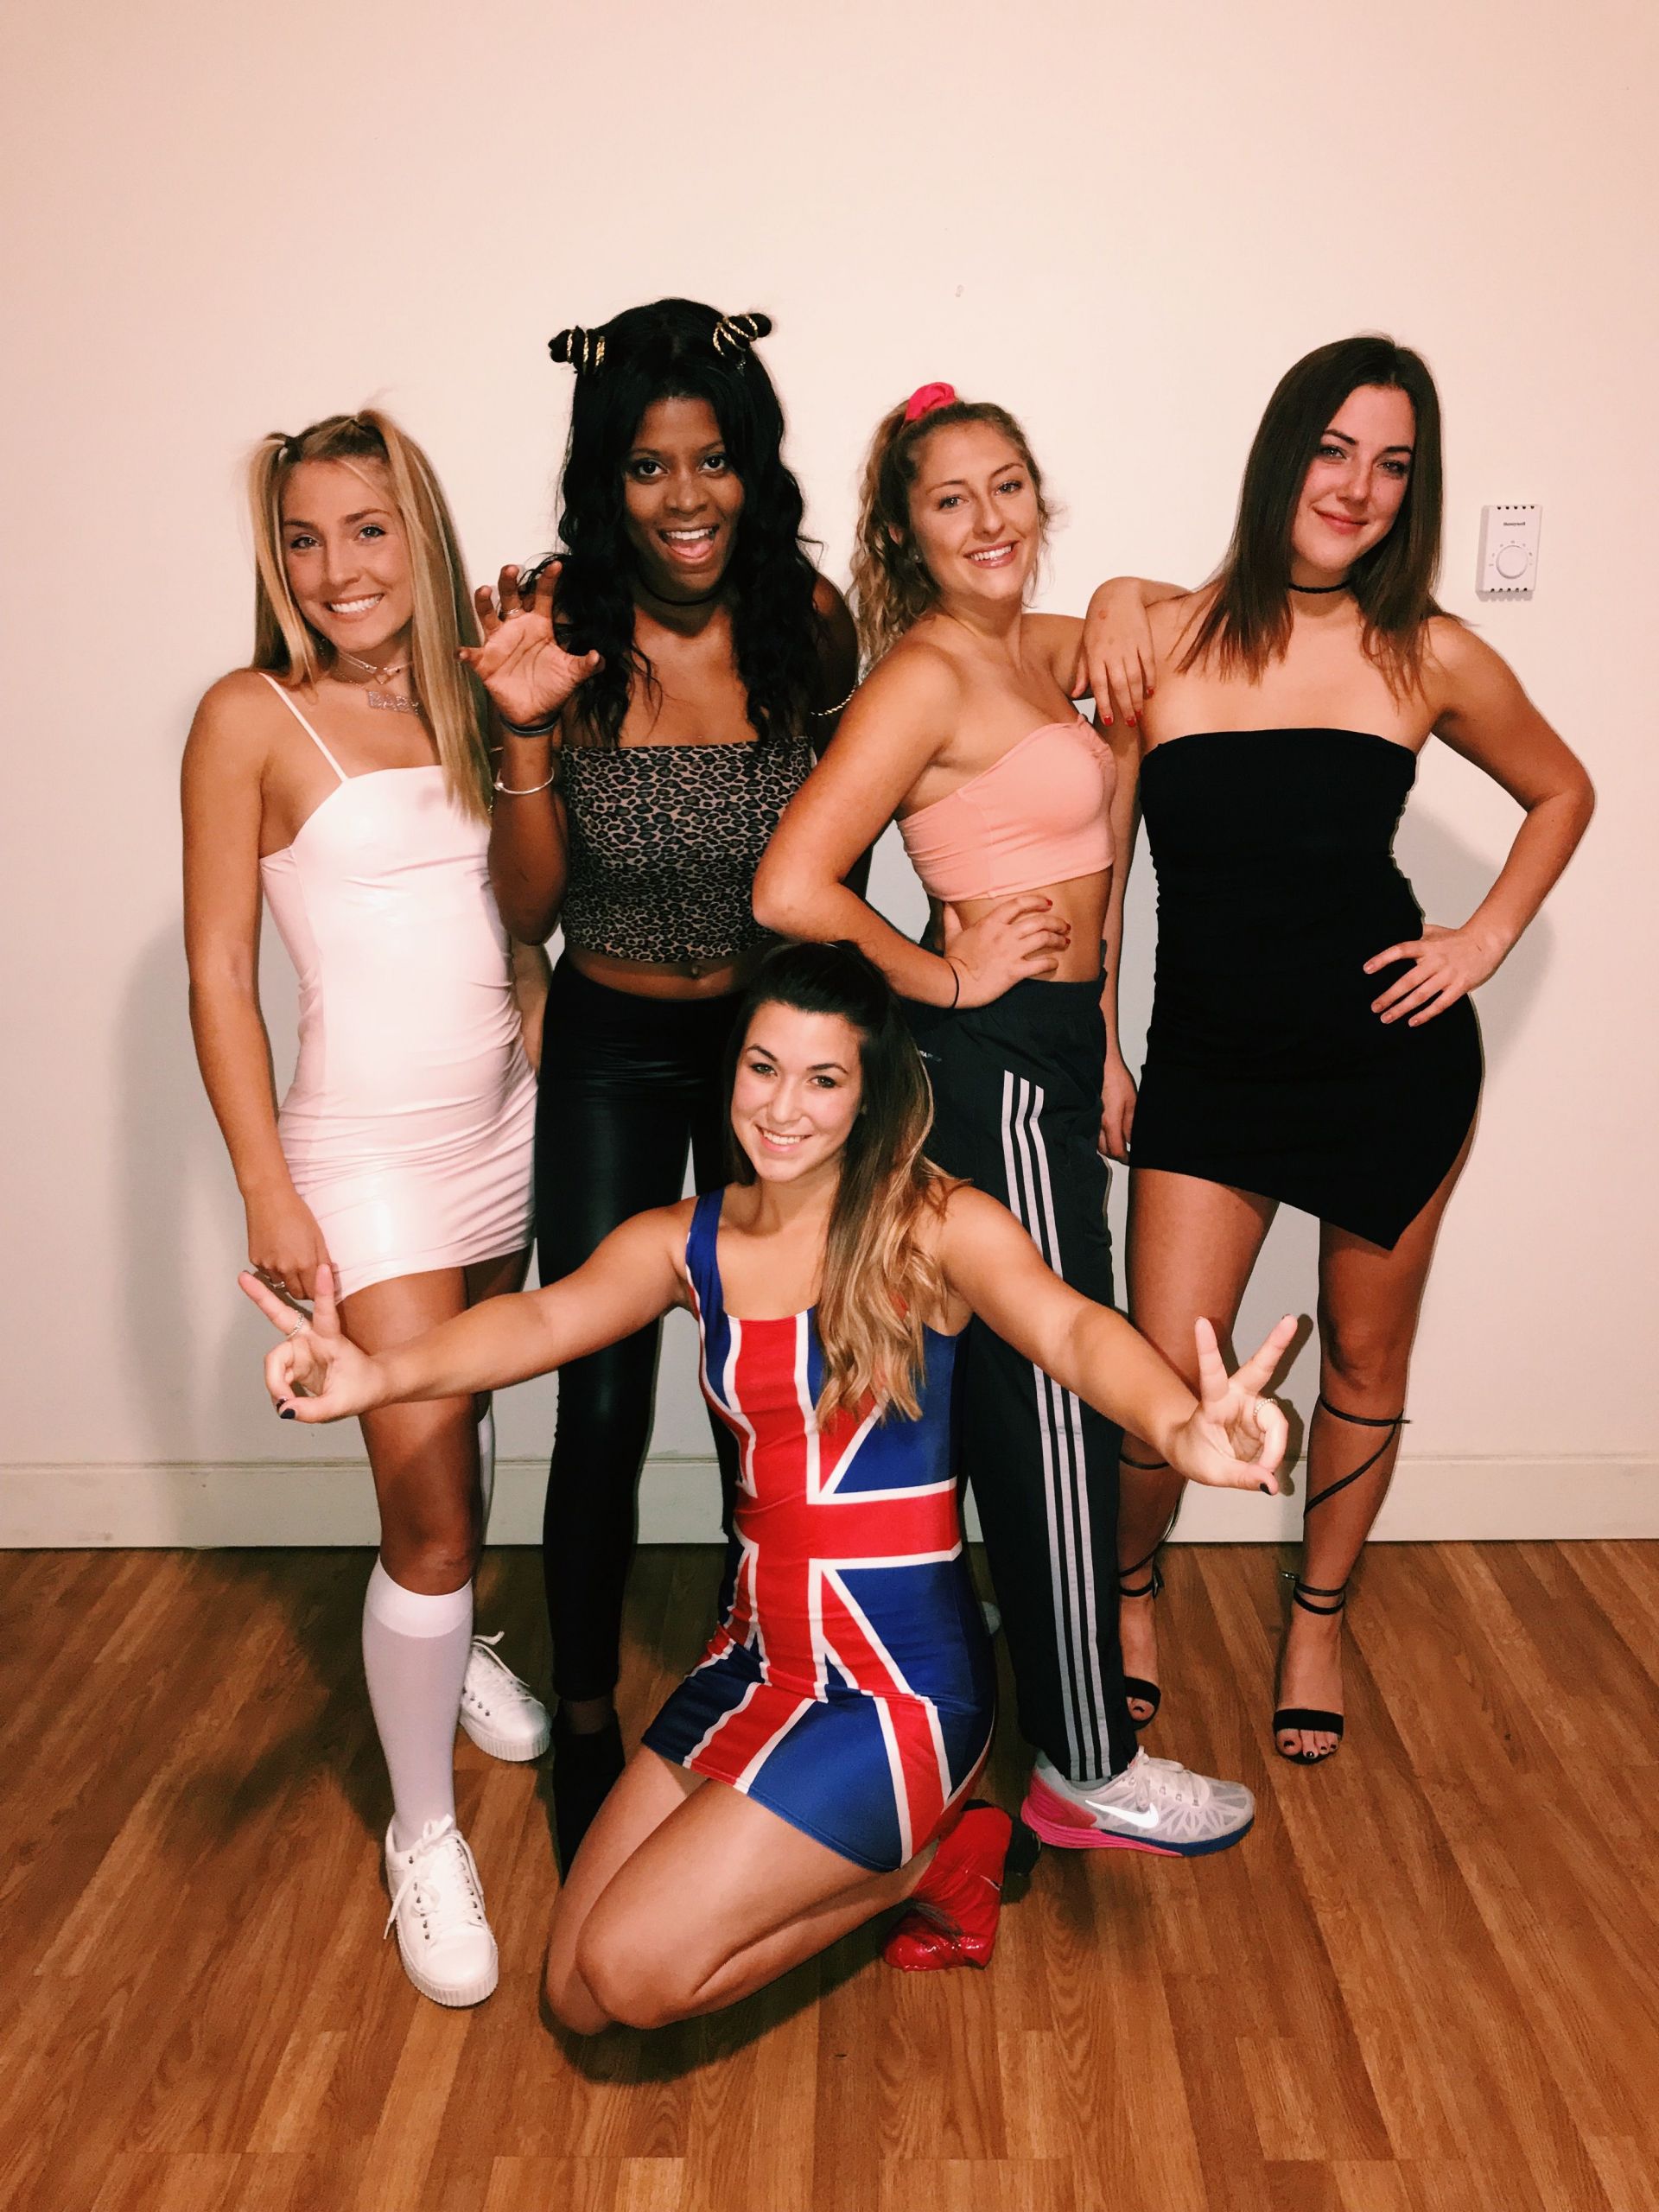 Halloween Outfit Ideen Best Of Spice Girls Halloween Costumes College Costume Ideas 90s